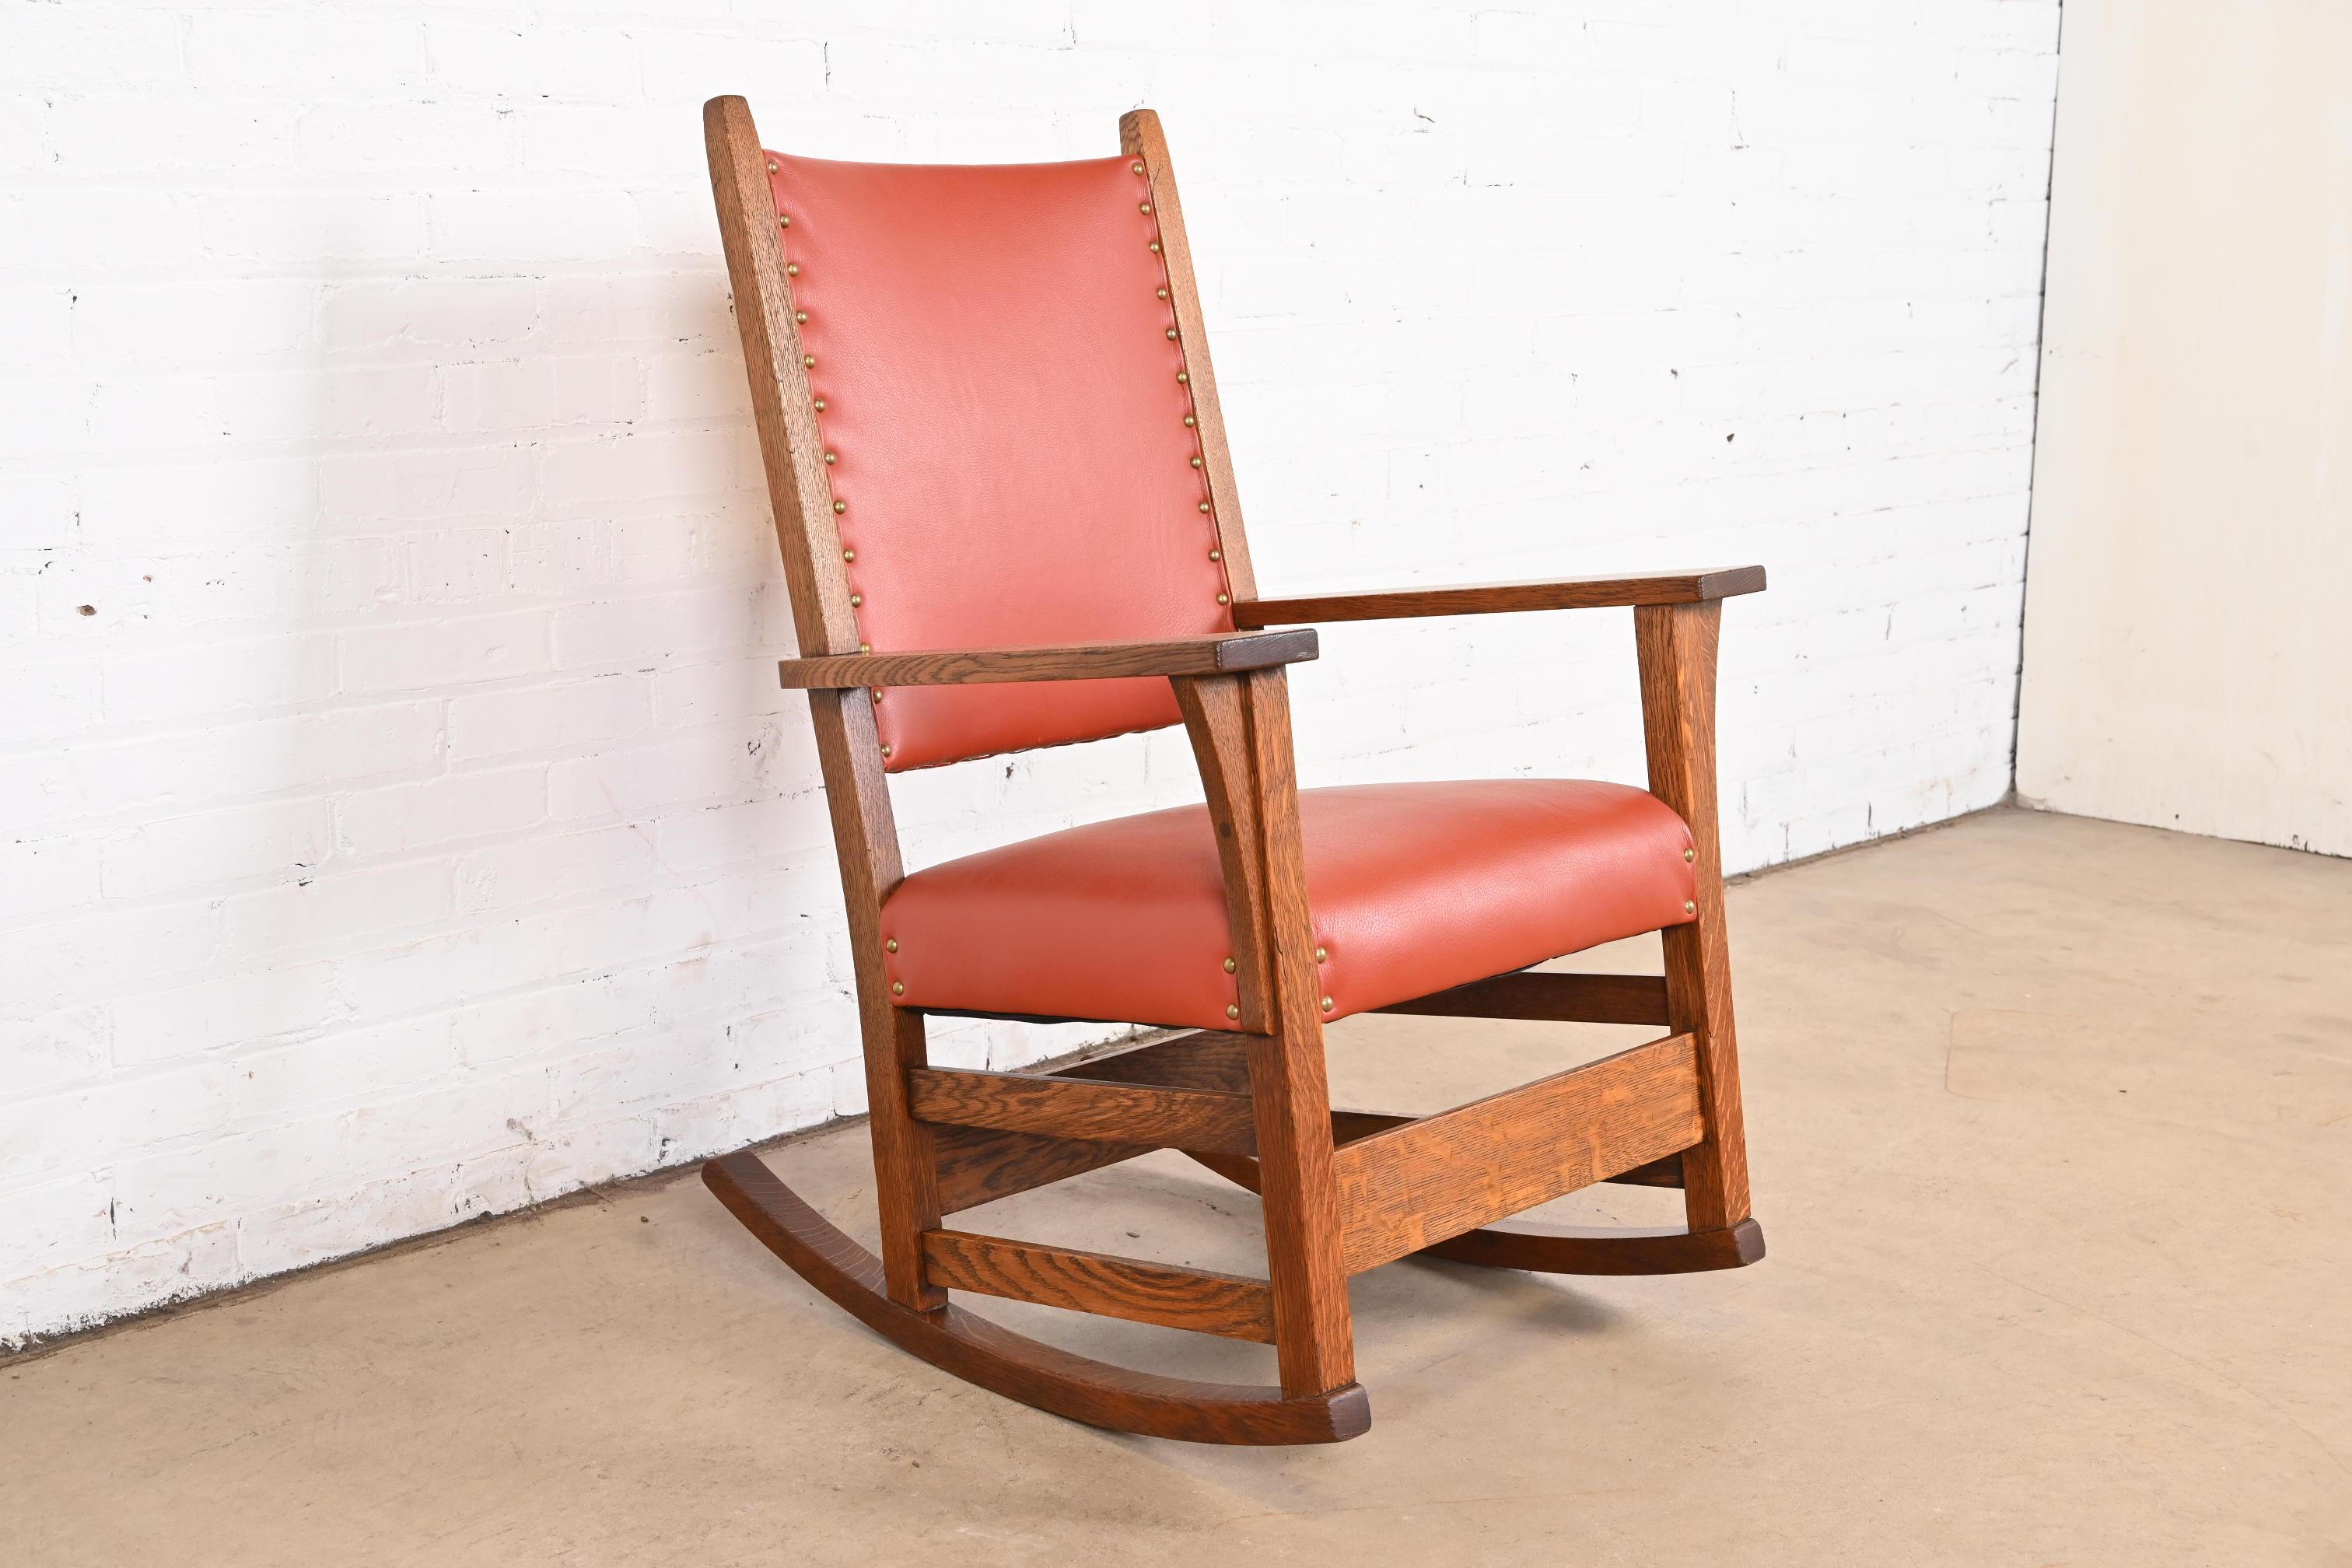 American Gustav Stickley Arts & Crafts Oak and Leather Rocking Chair, Fully Restored For Sale